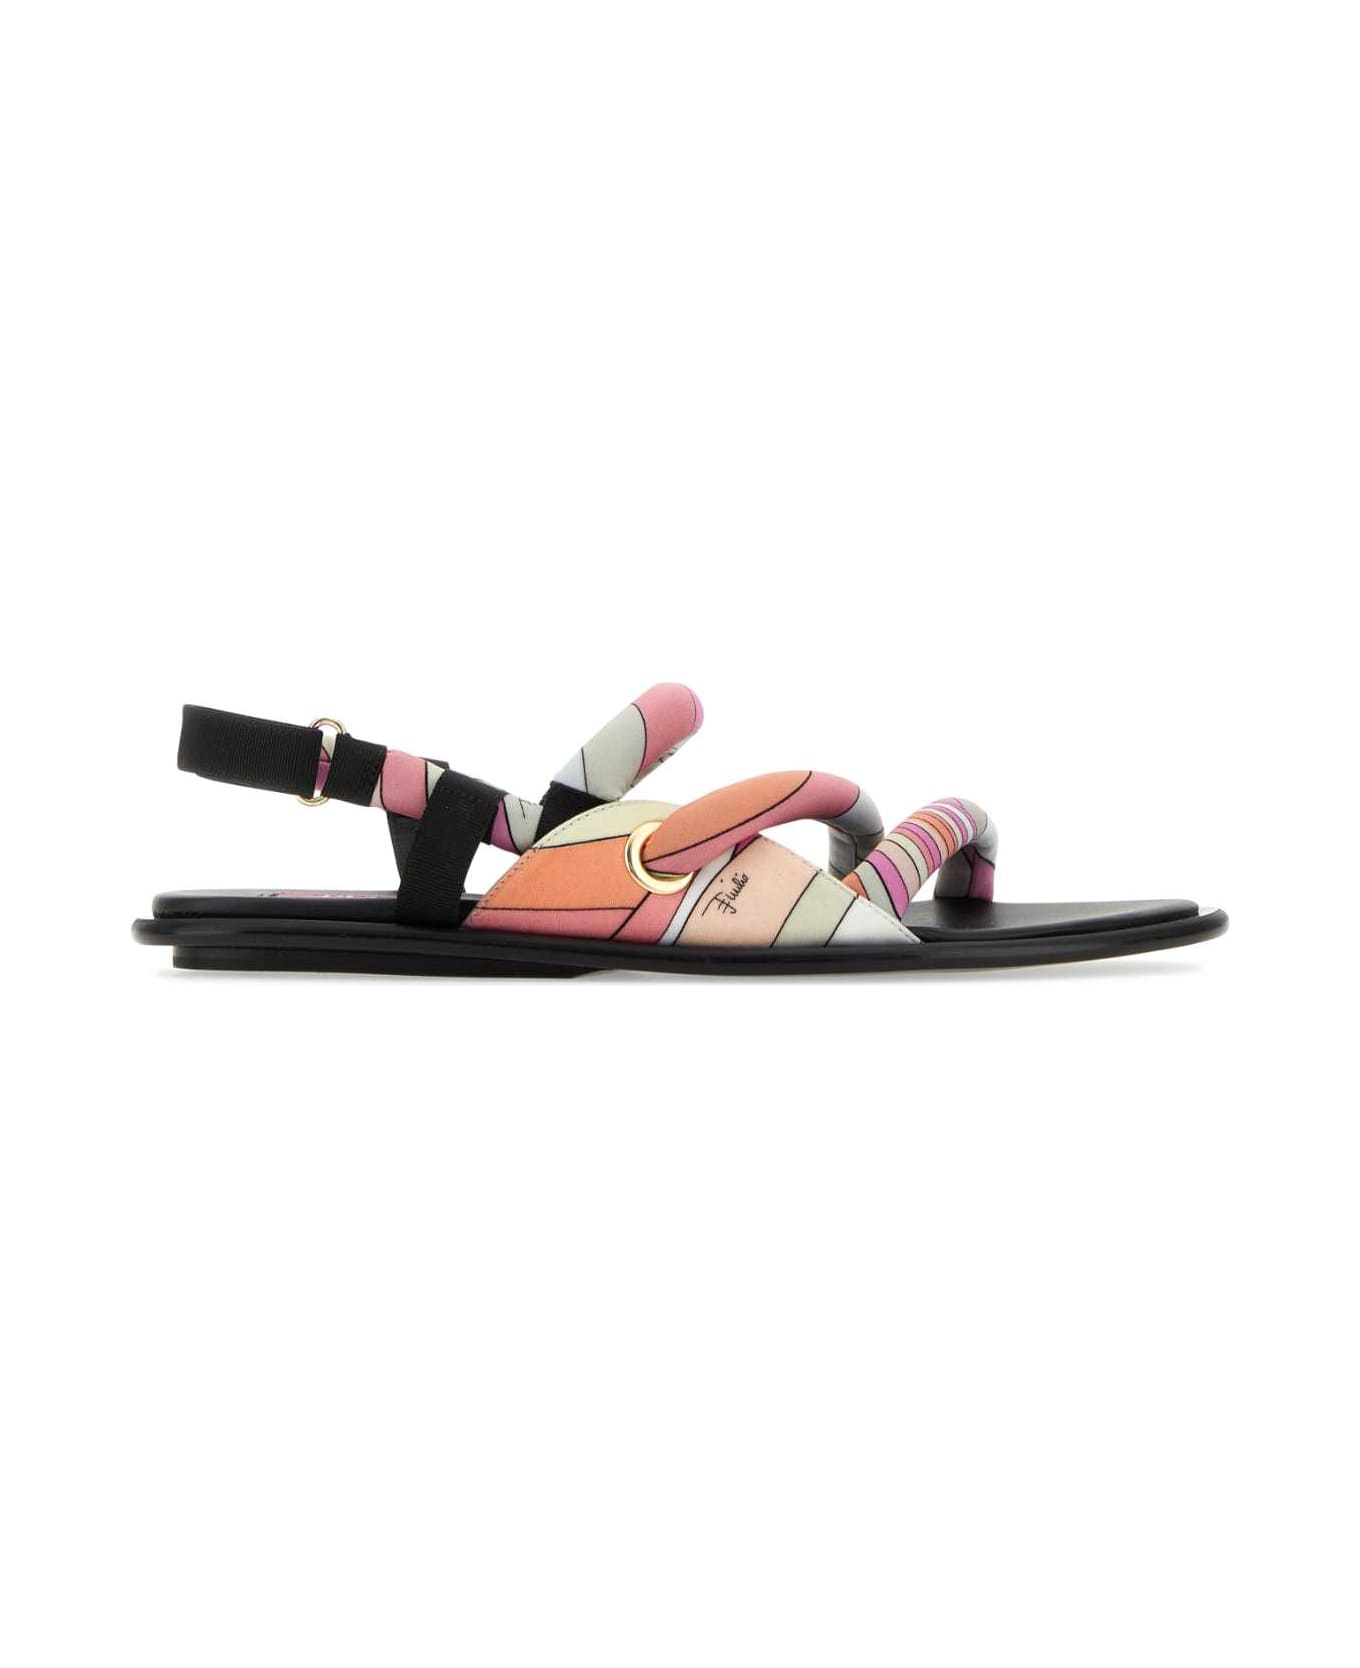 Pucci Printed Fabric Lee Sandals - ROSA